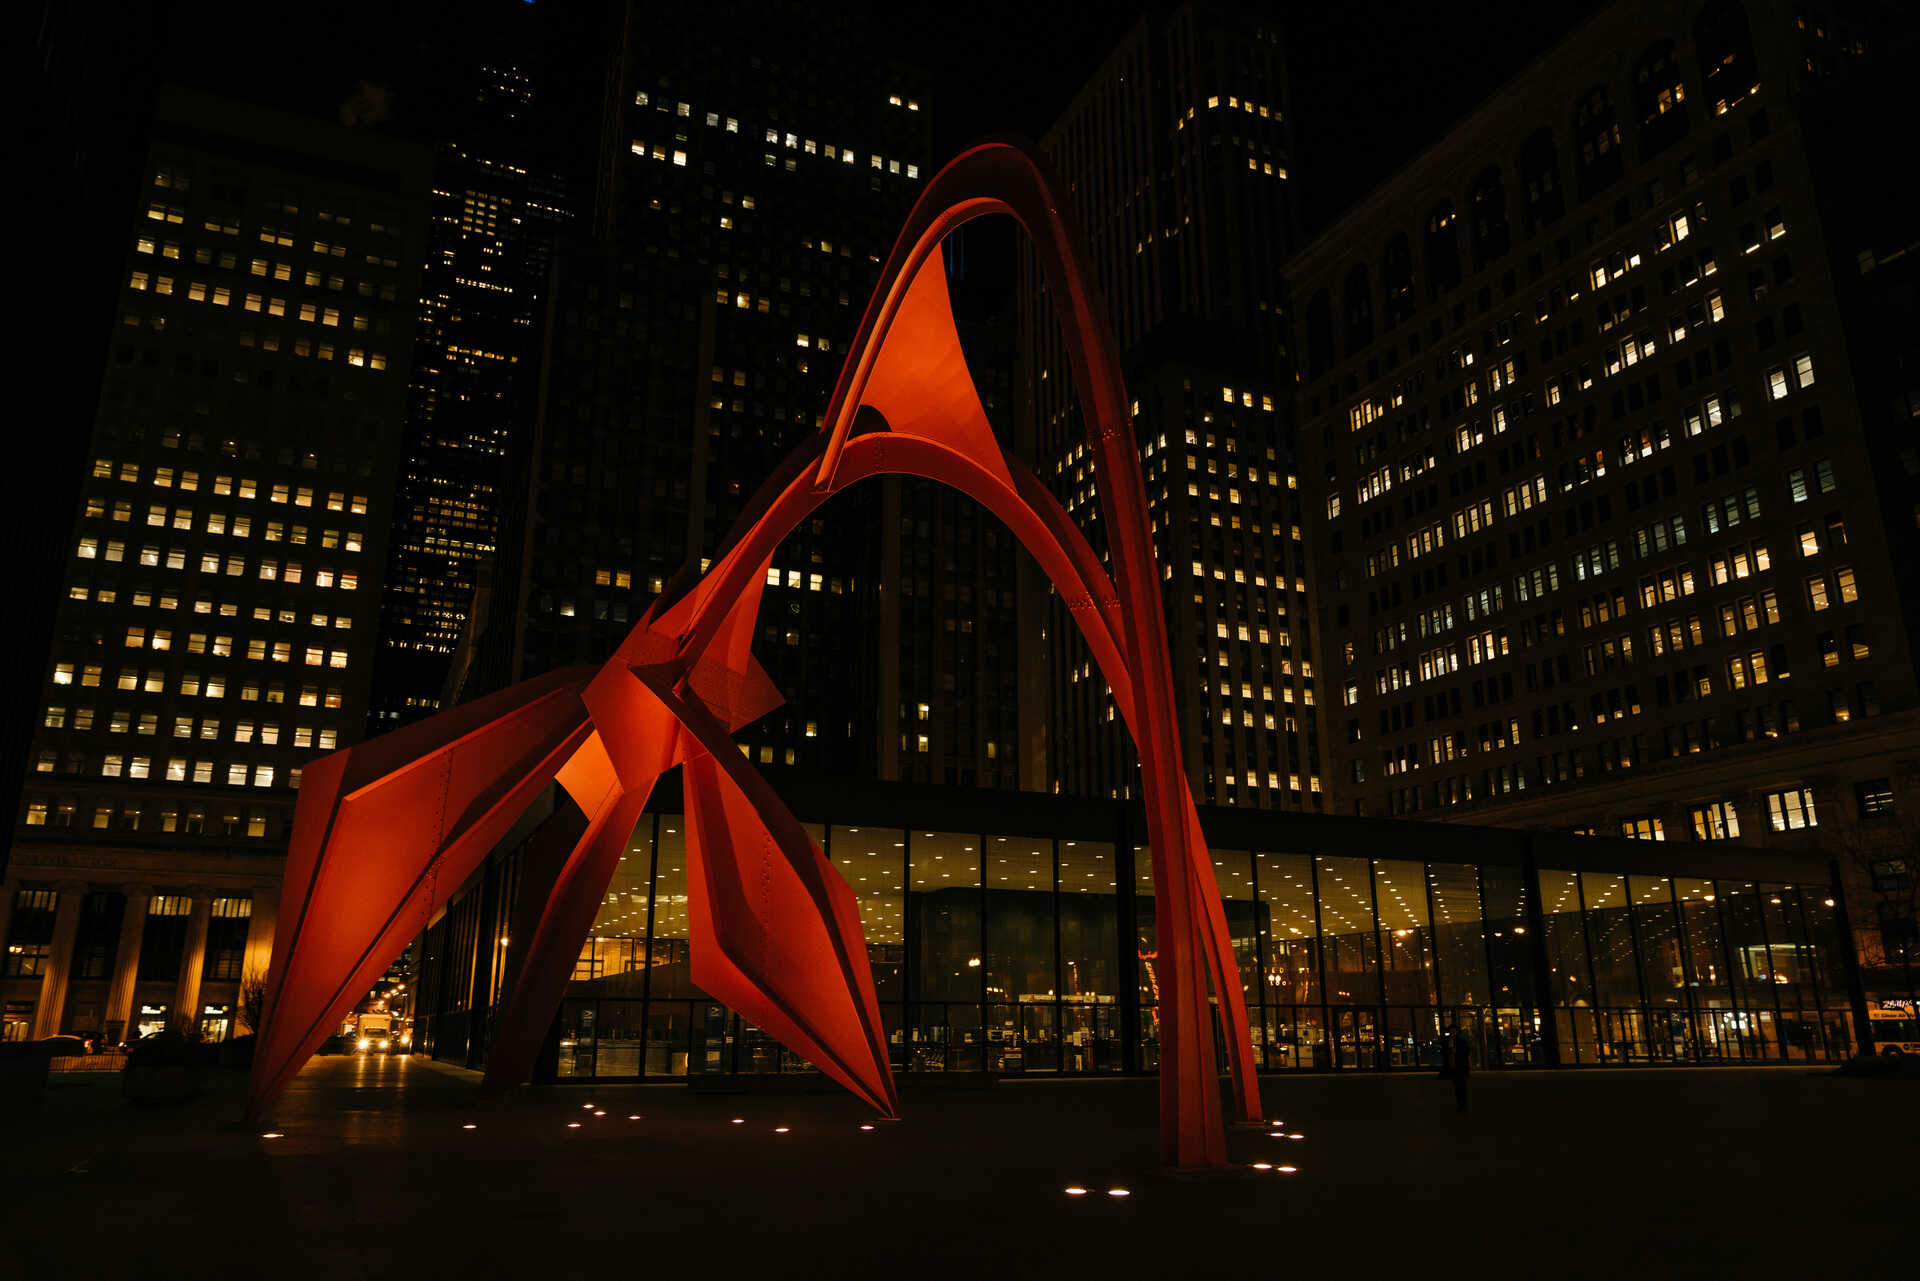 The Flamingo by Alexander Calder in Chicago, Illinois